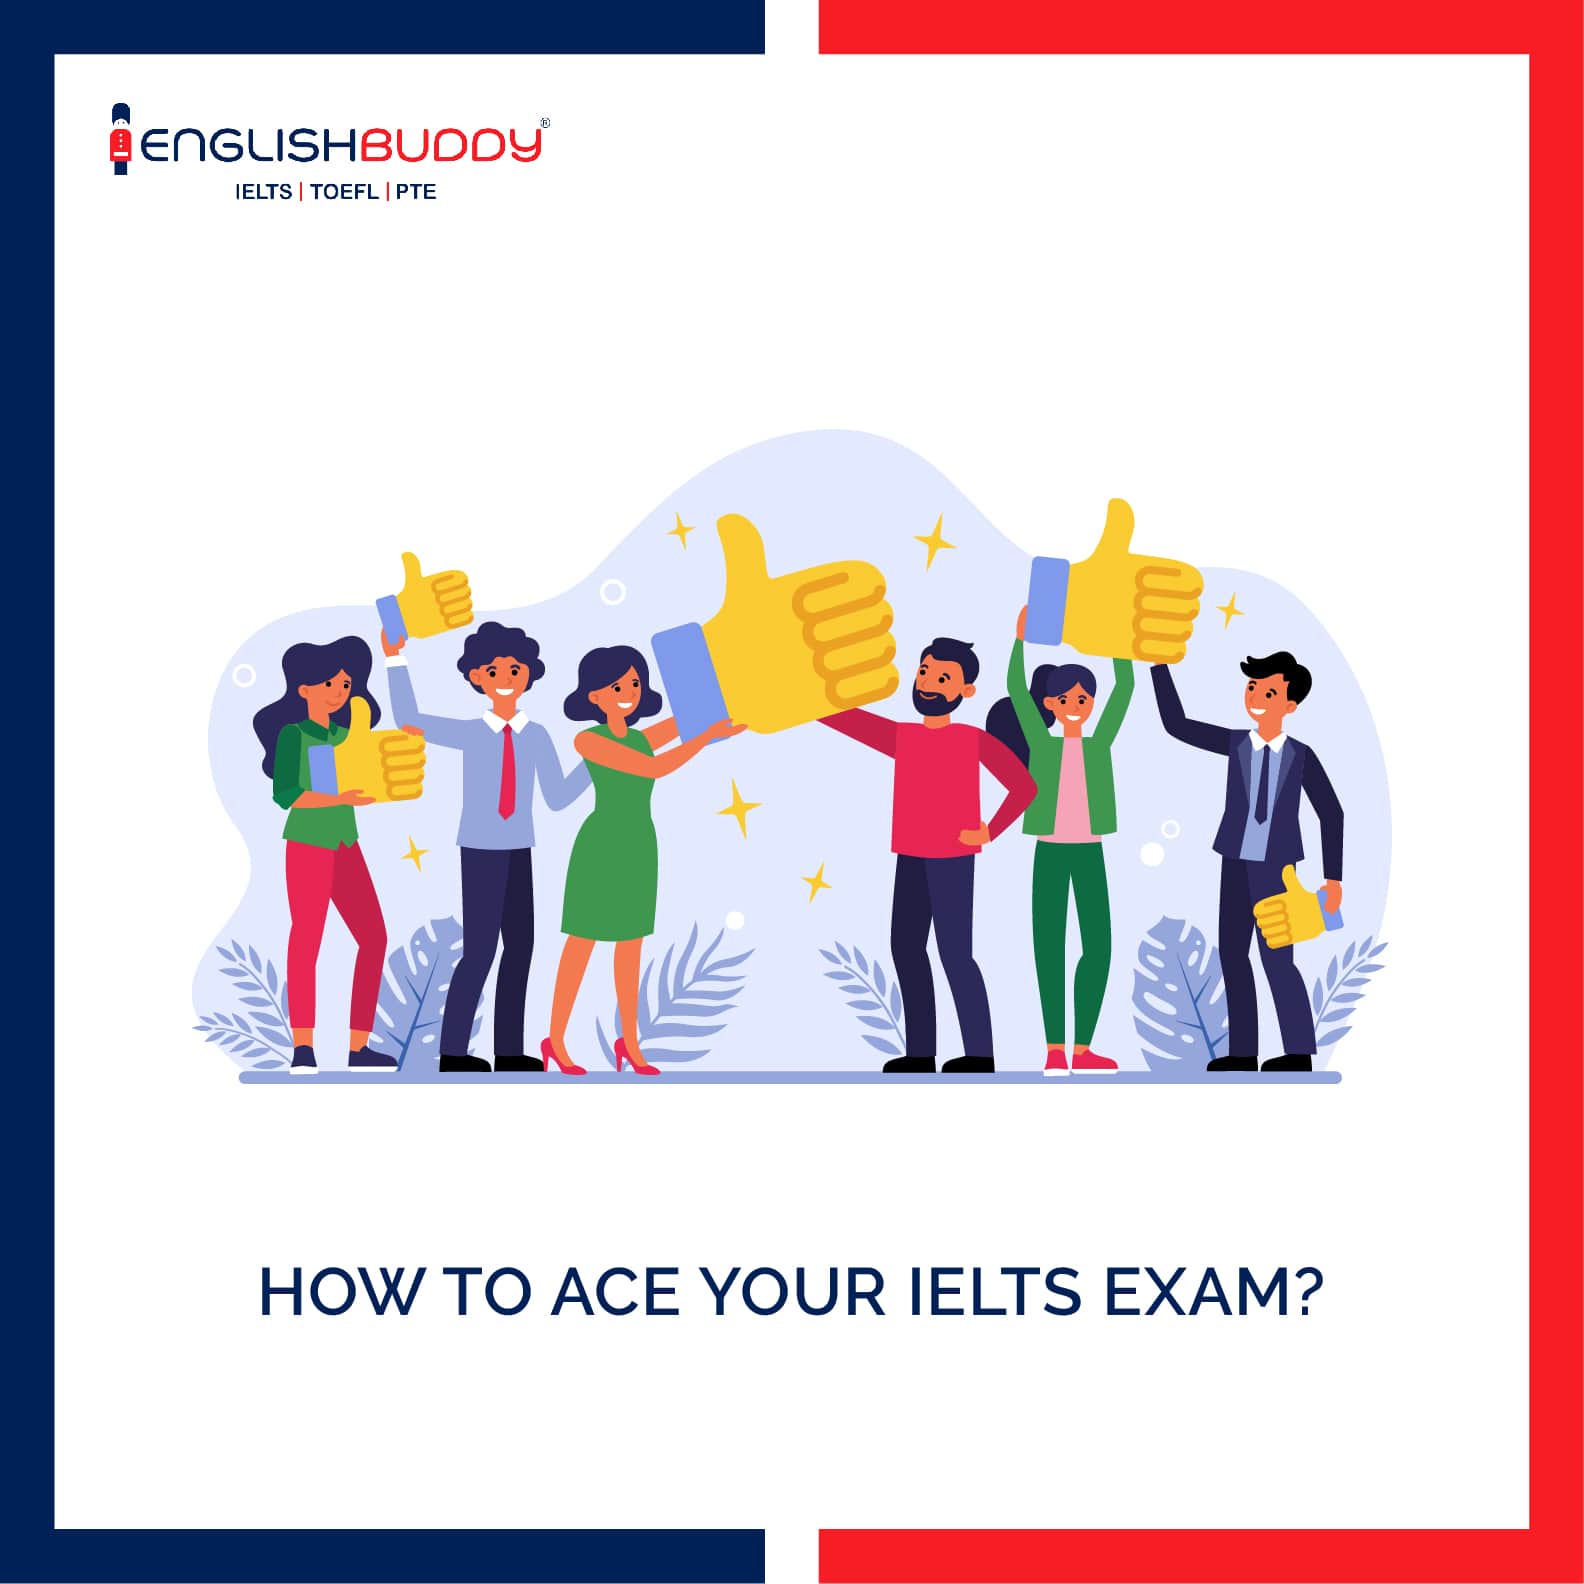 A rational approach to ace your IELTS exam